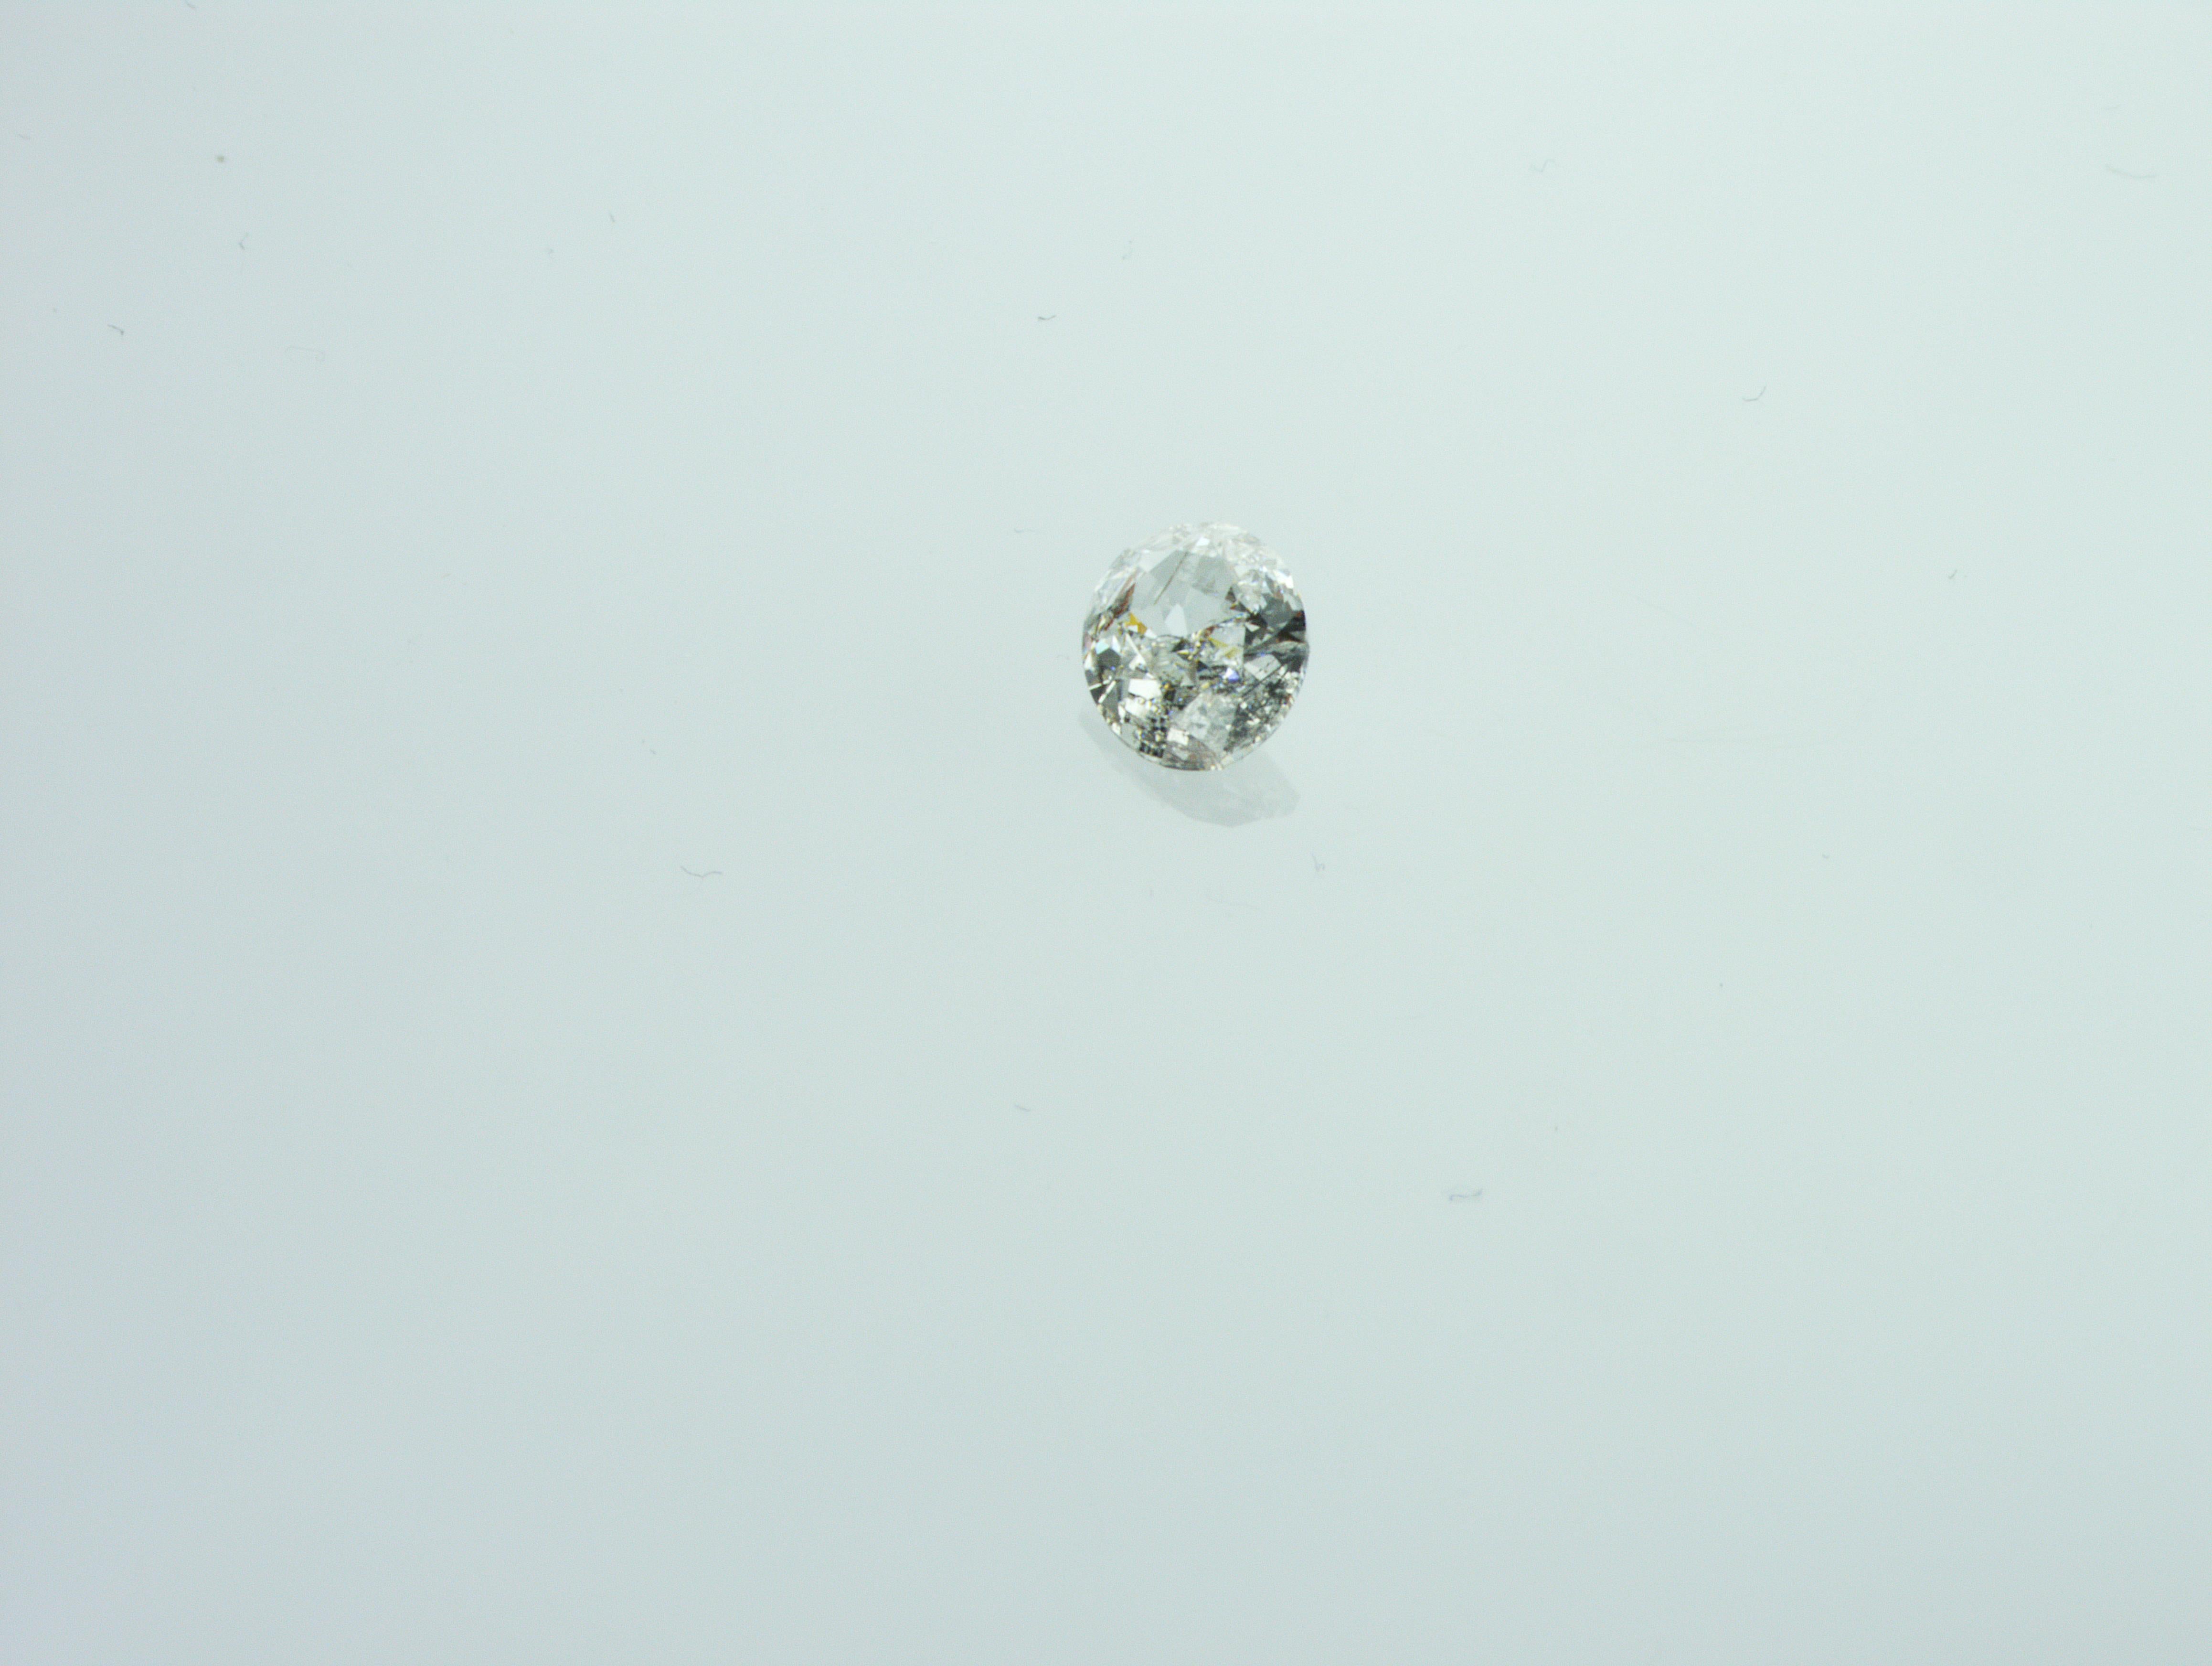 We are natural diamond production company located in Dubai.
Weight: 1.13ct
Shape: Oval
Color: rare white (G)
Clarity: P1 (I1)
Polish: Very Good
Symm: Good
Dimensions (mm): 8.87 x 6.10 x 3.01
All our diamonds with the inscription from the